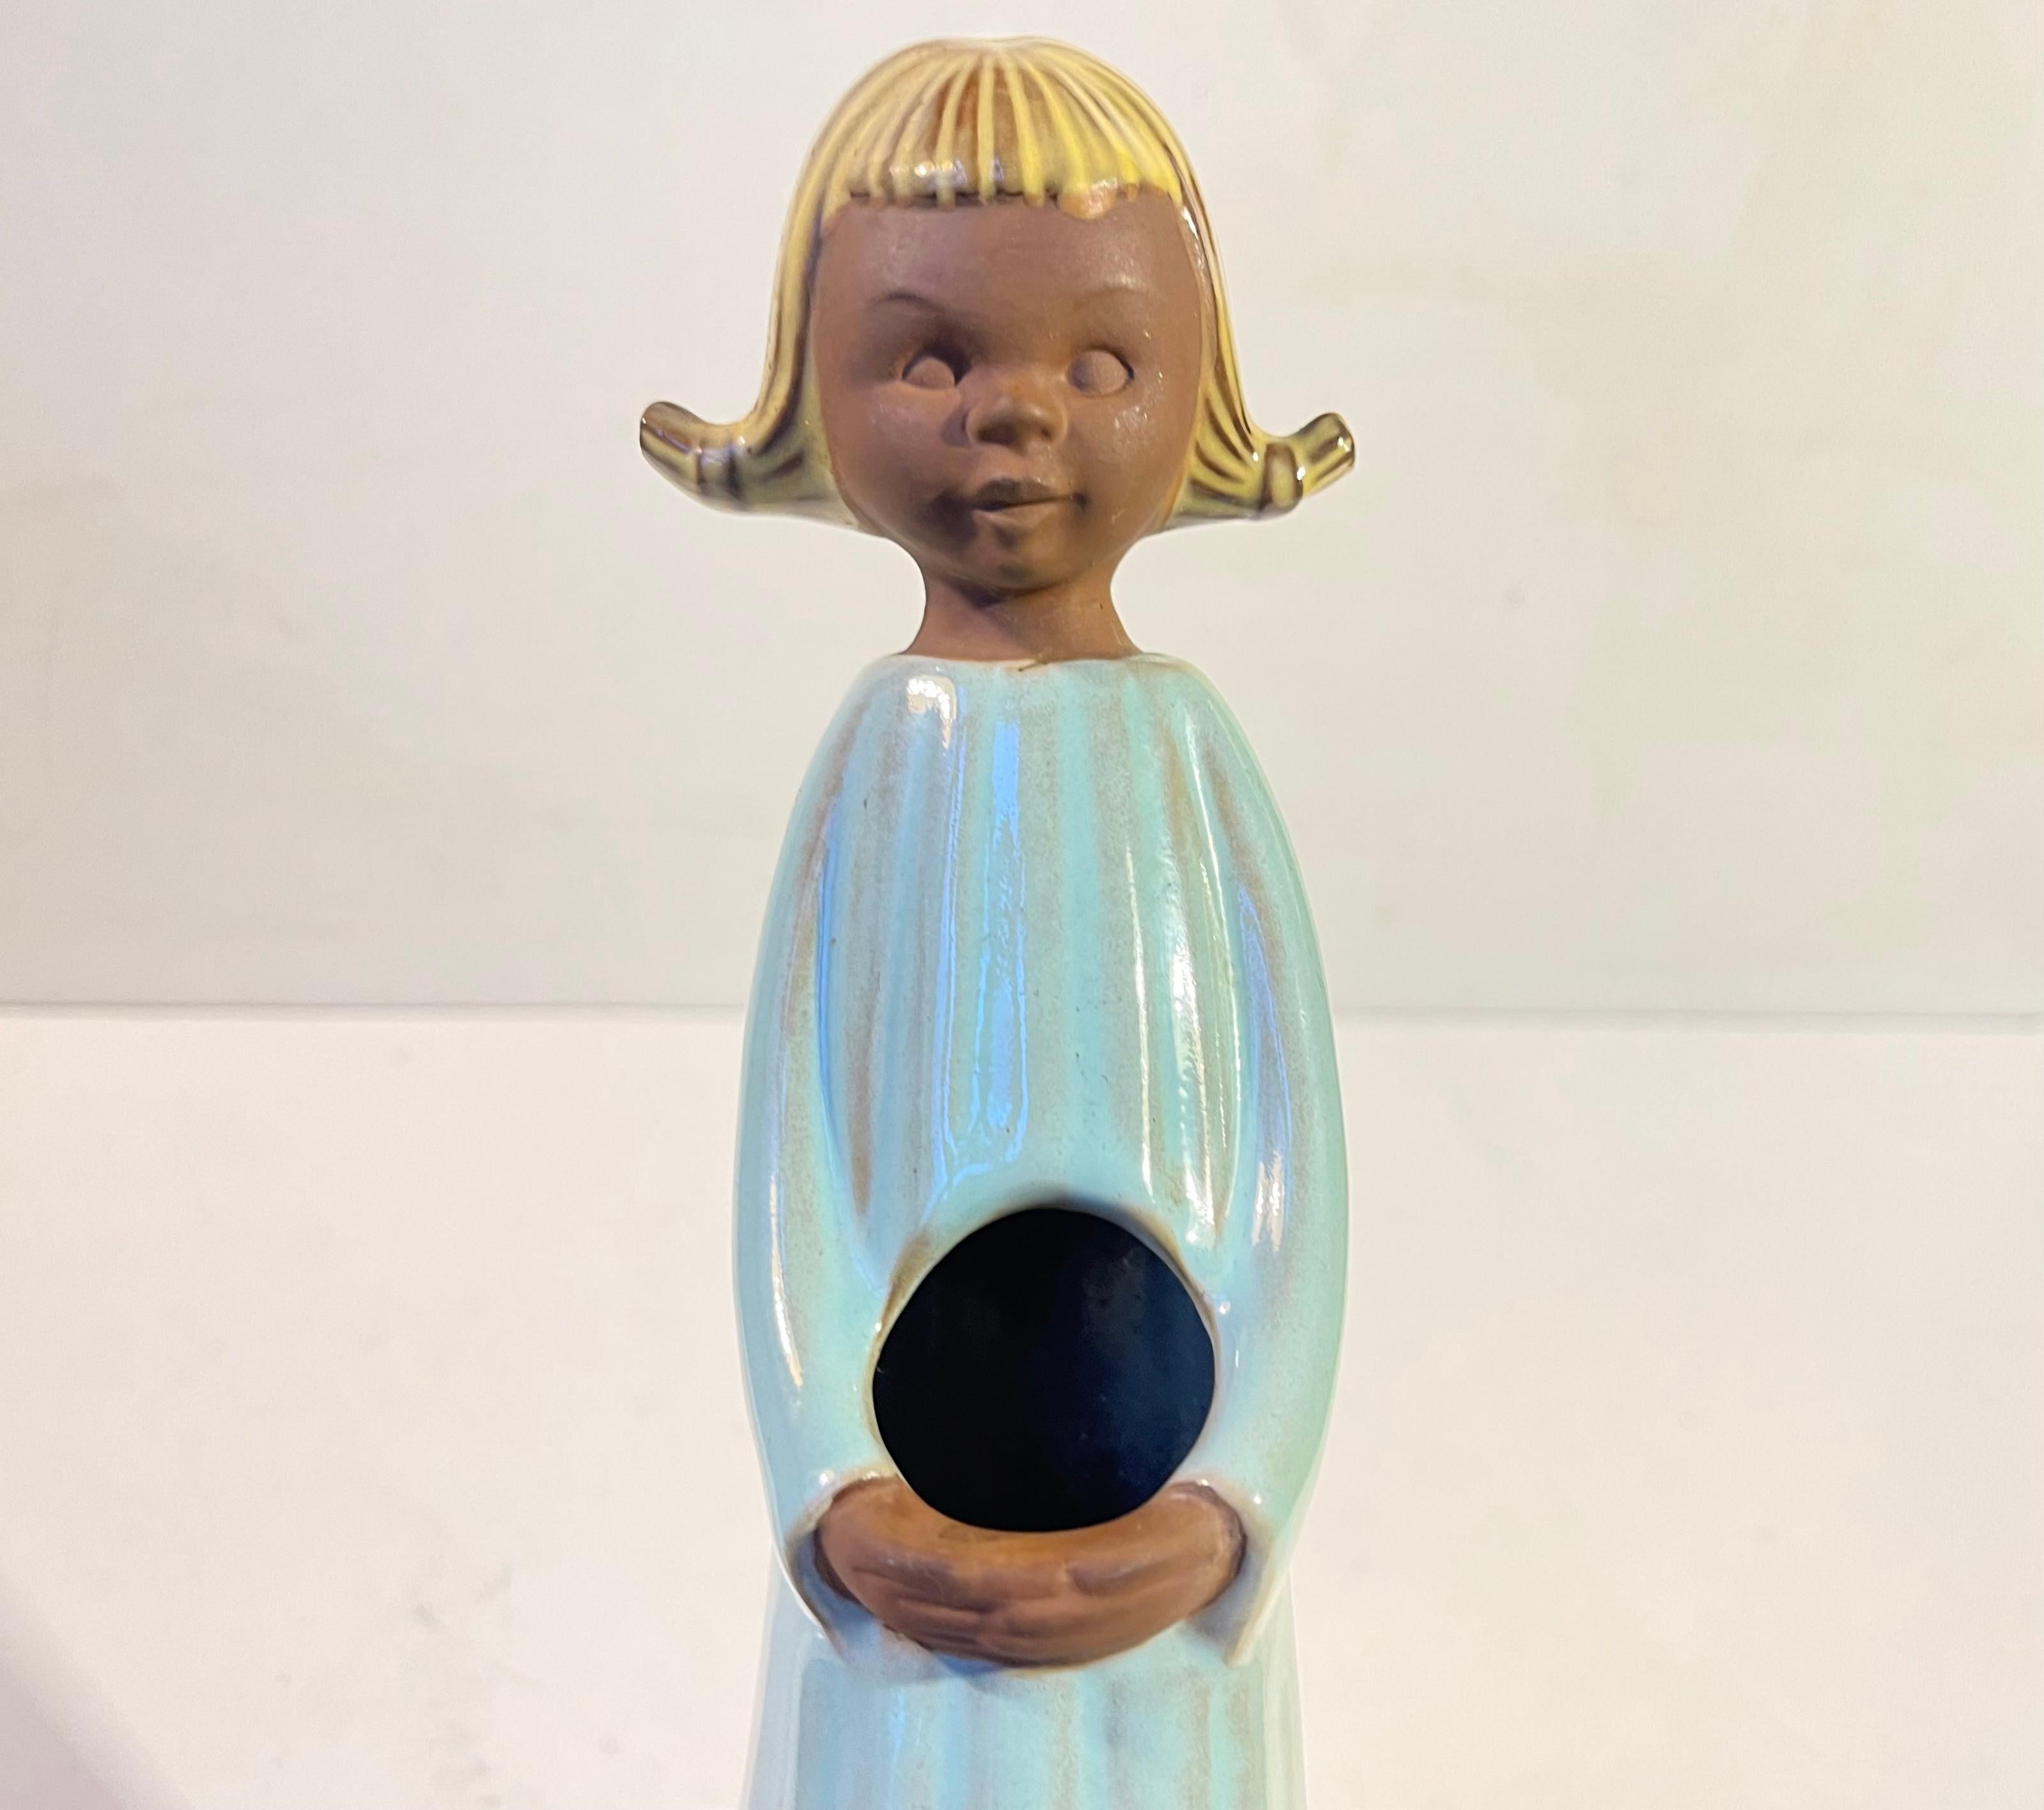 German Figural glazed ceramic vase number VF 22 from 1968. Made by. W. Goebel in 1968. This is the tall version measuring 24 cm in Height and with a diameter of 7 cm (base).